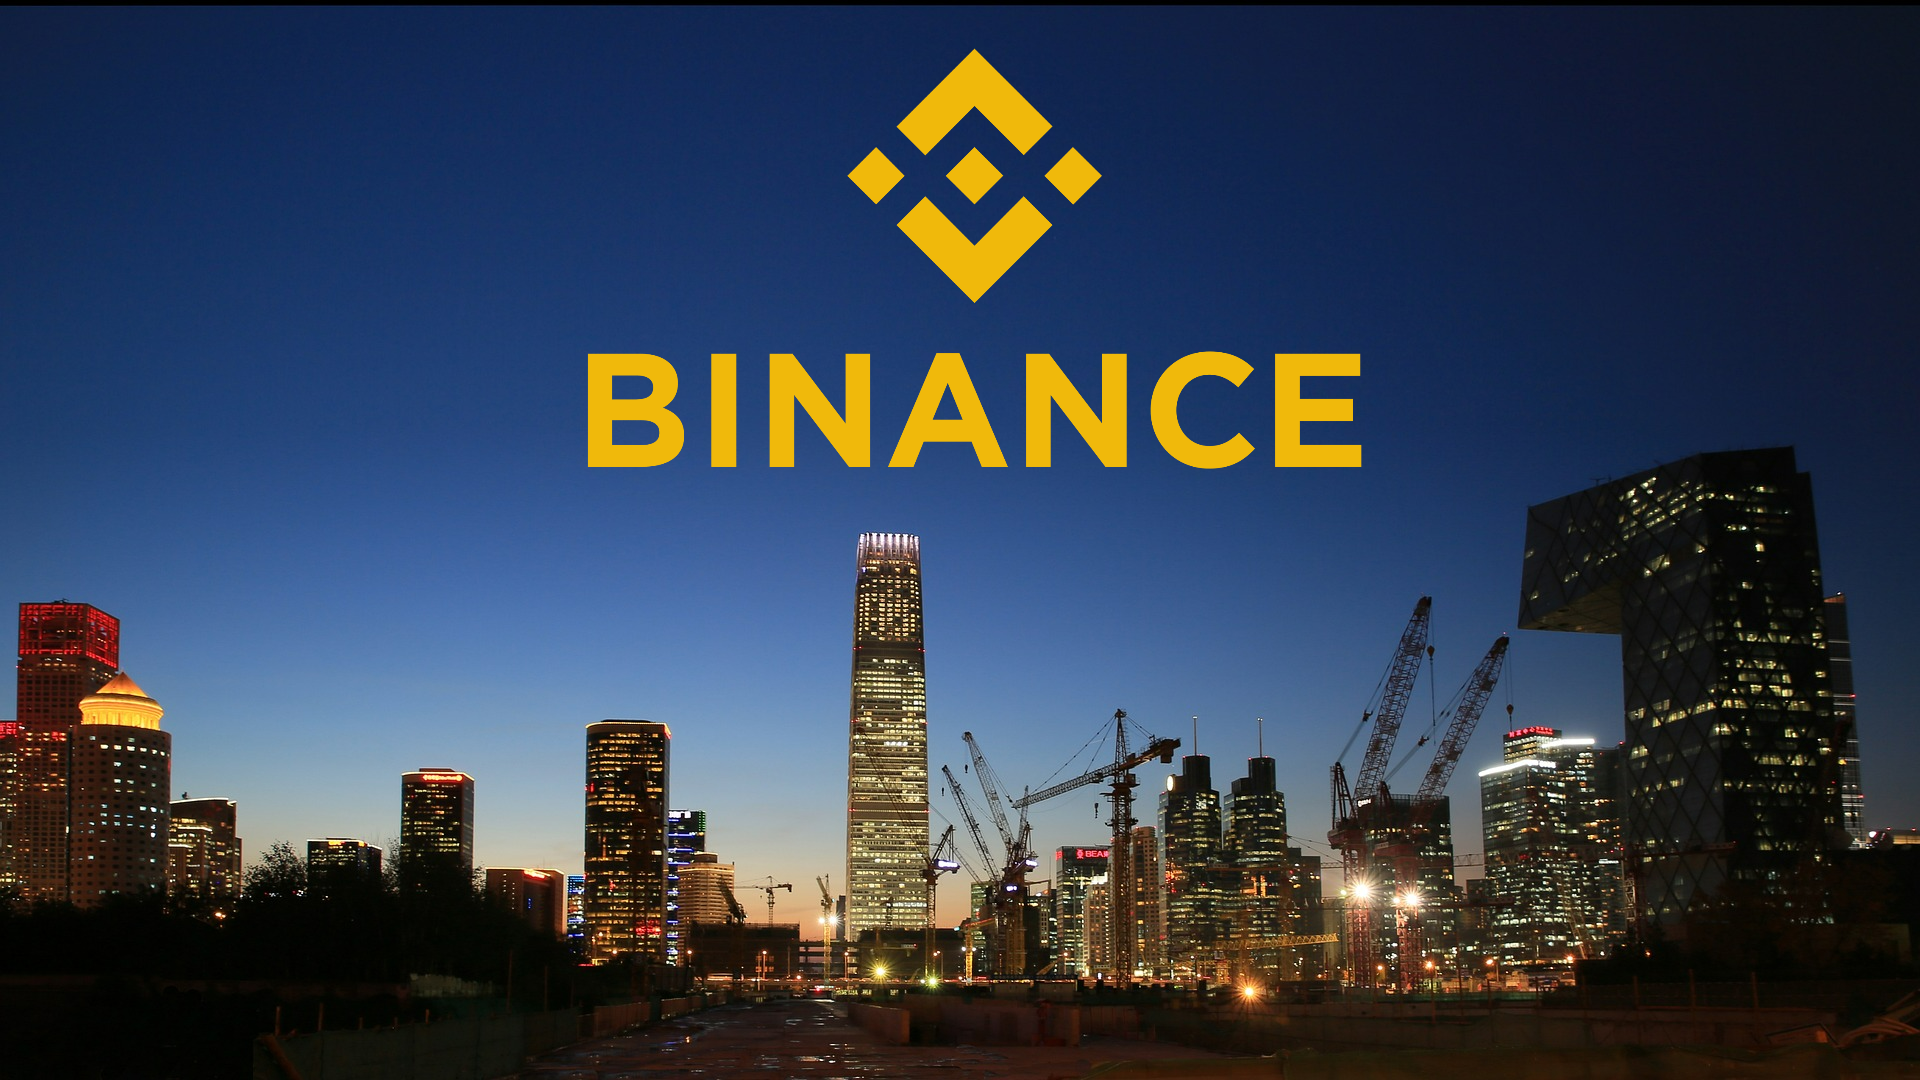 Shocking Revelation: Binance Concealed Links to China for Years, Company Documents Reveal